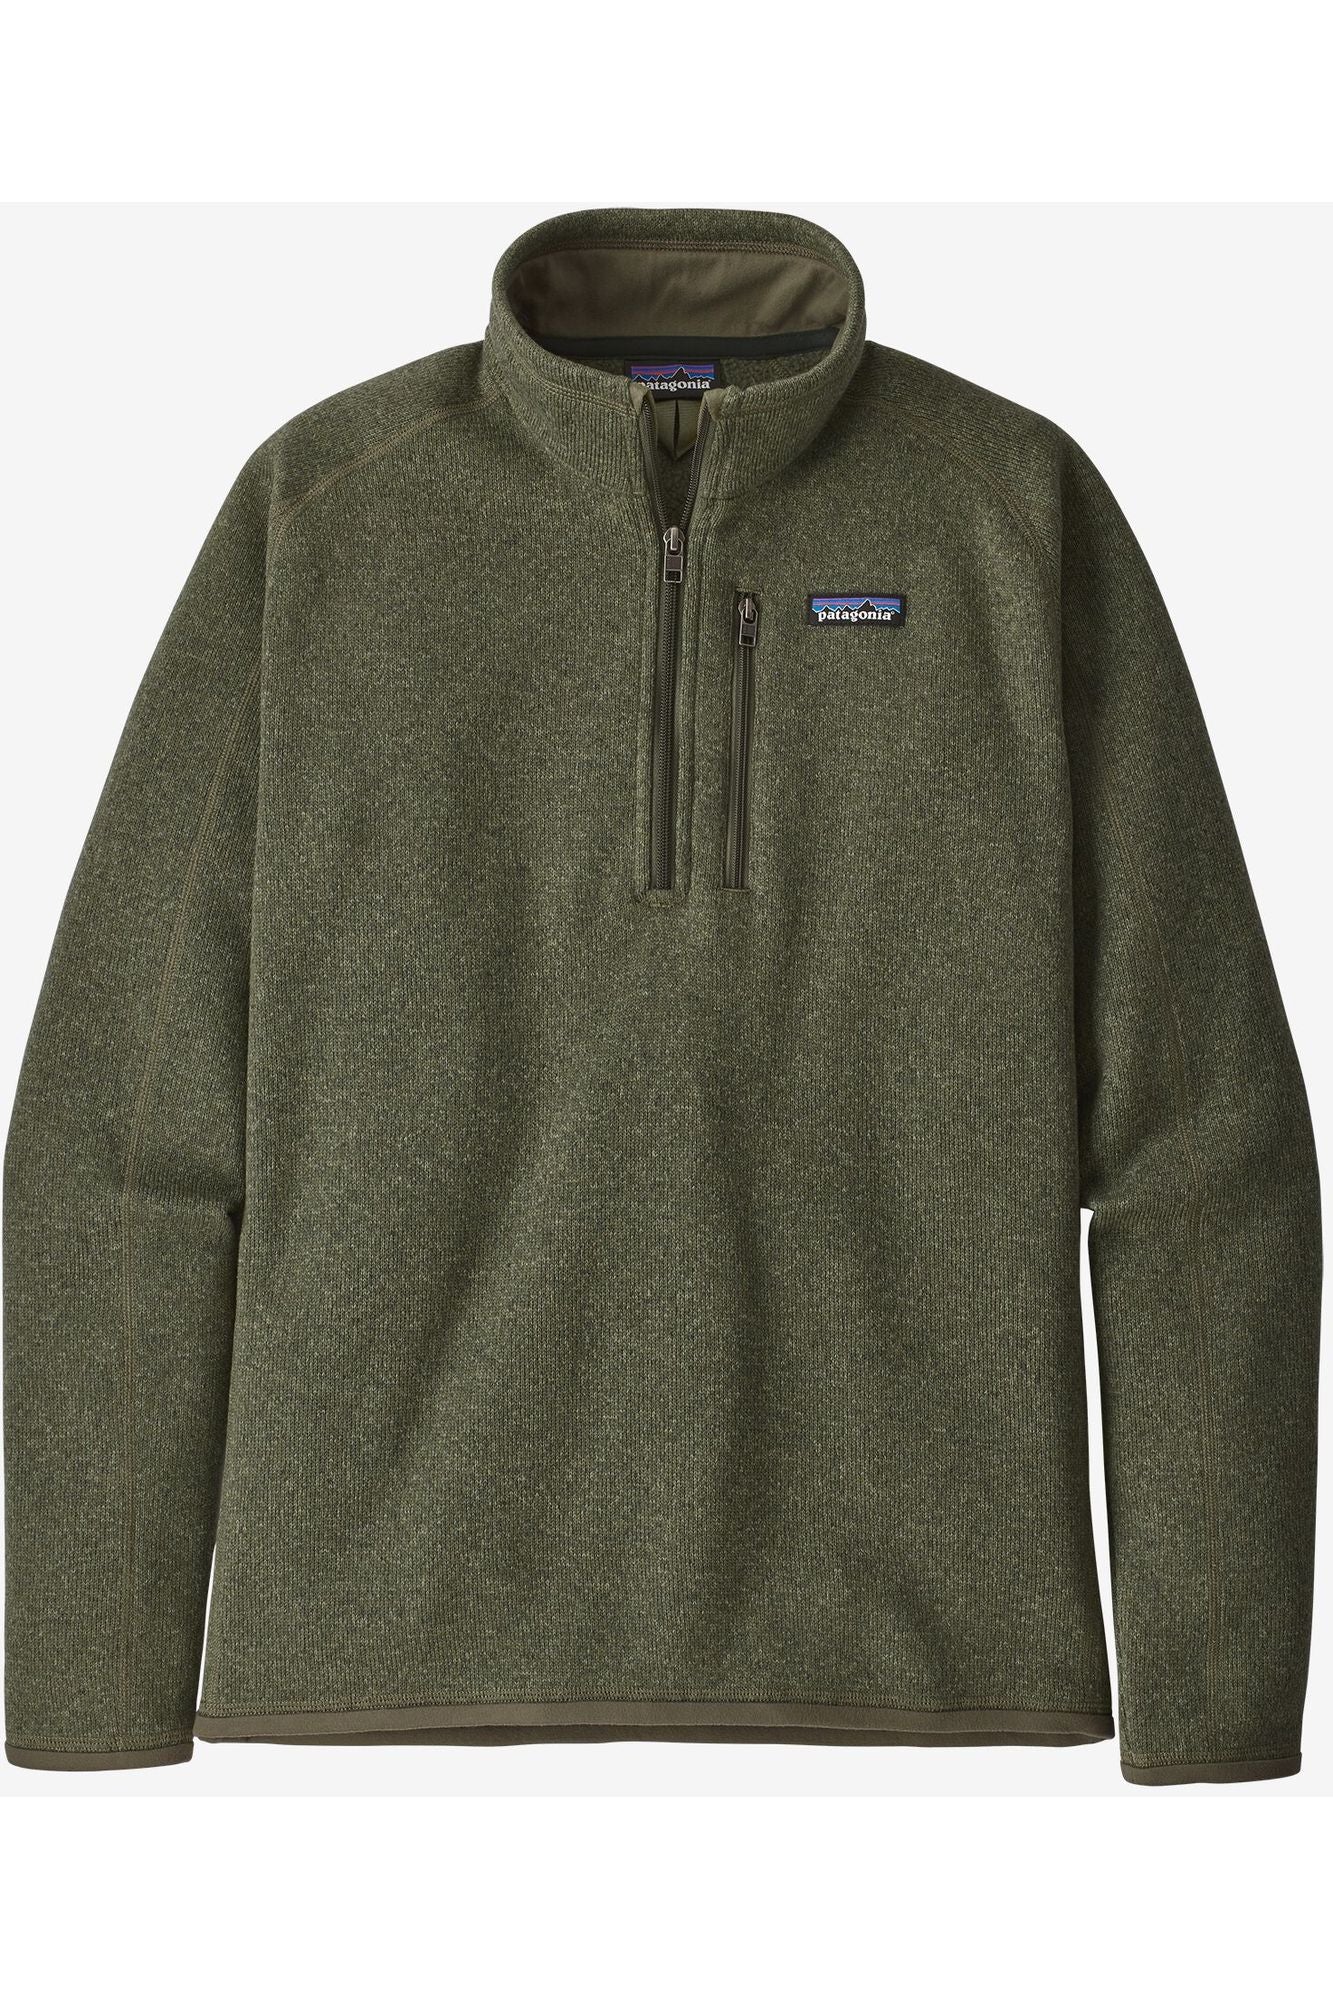 Patagonia Ms Better Sweater 1/4 Zip Industrial Green